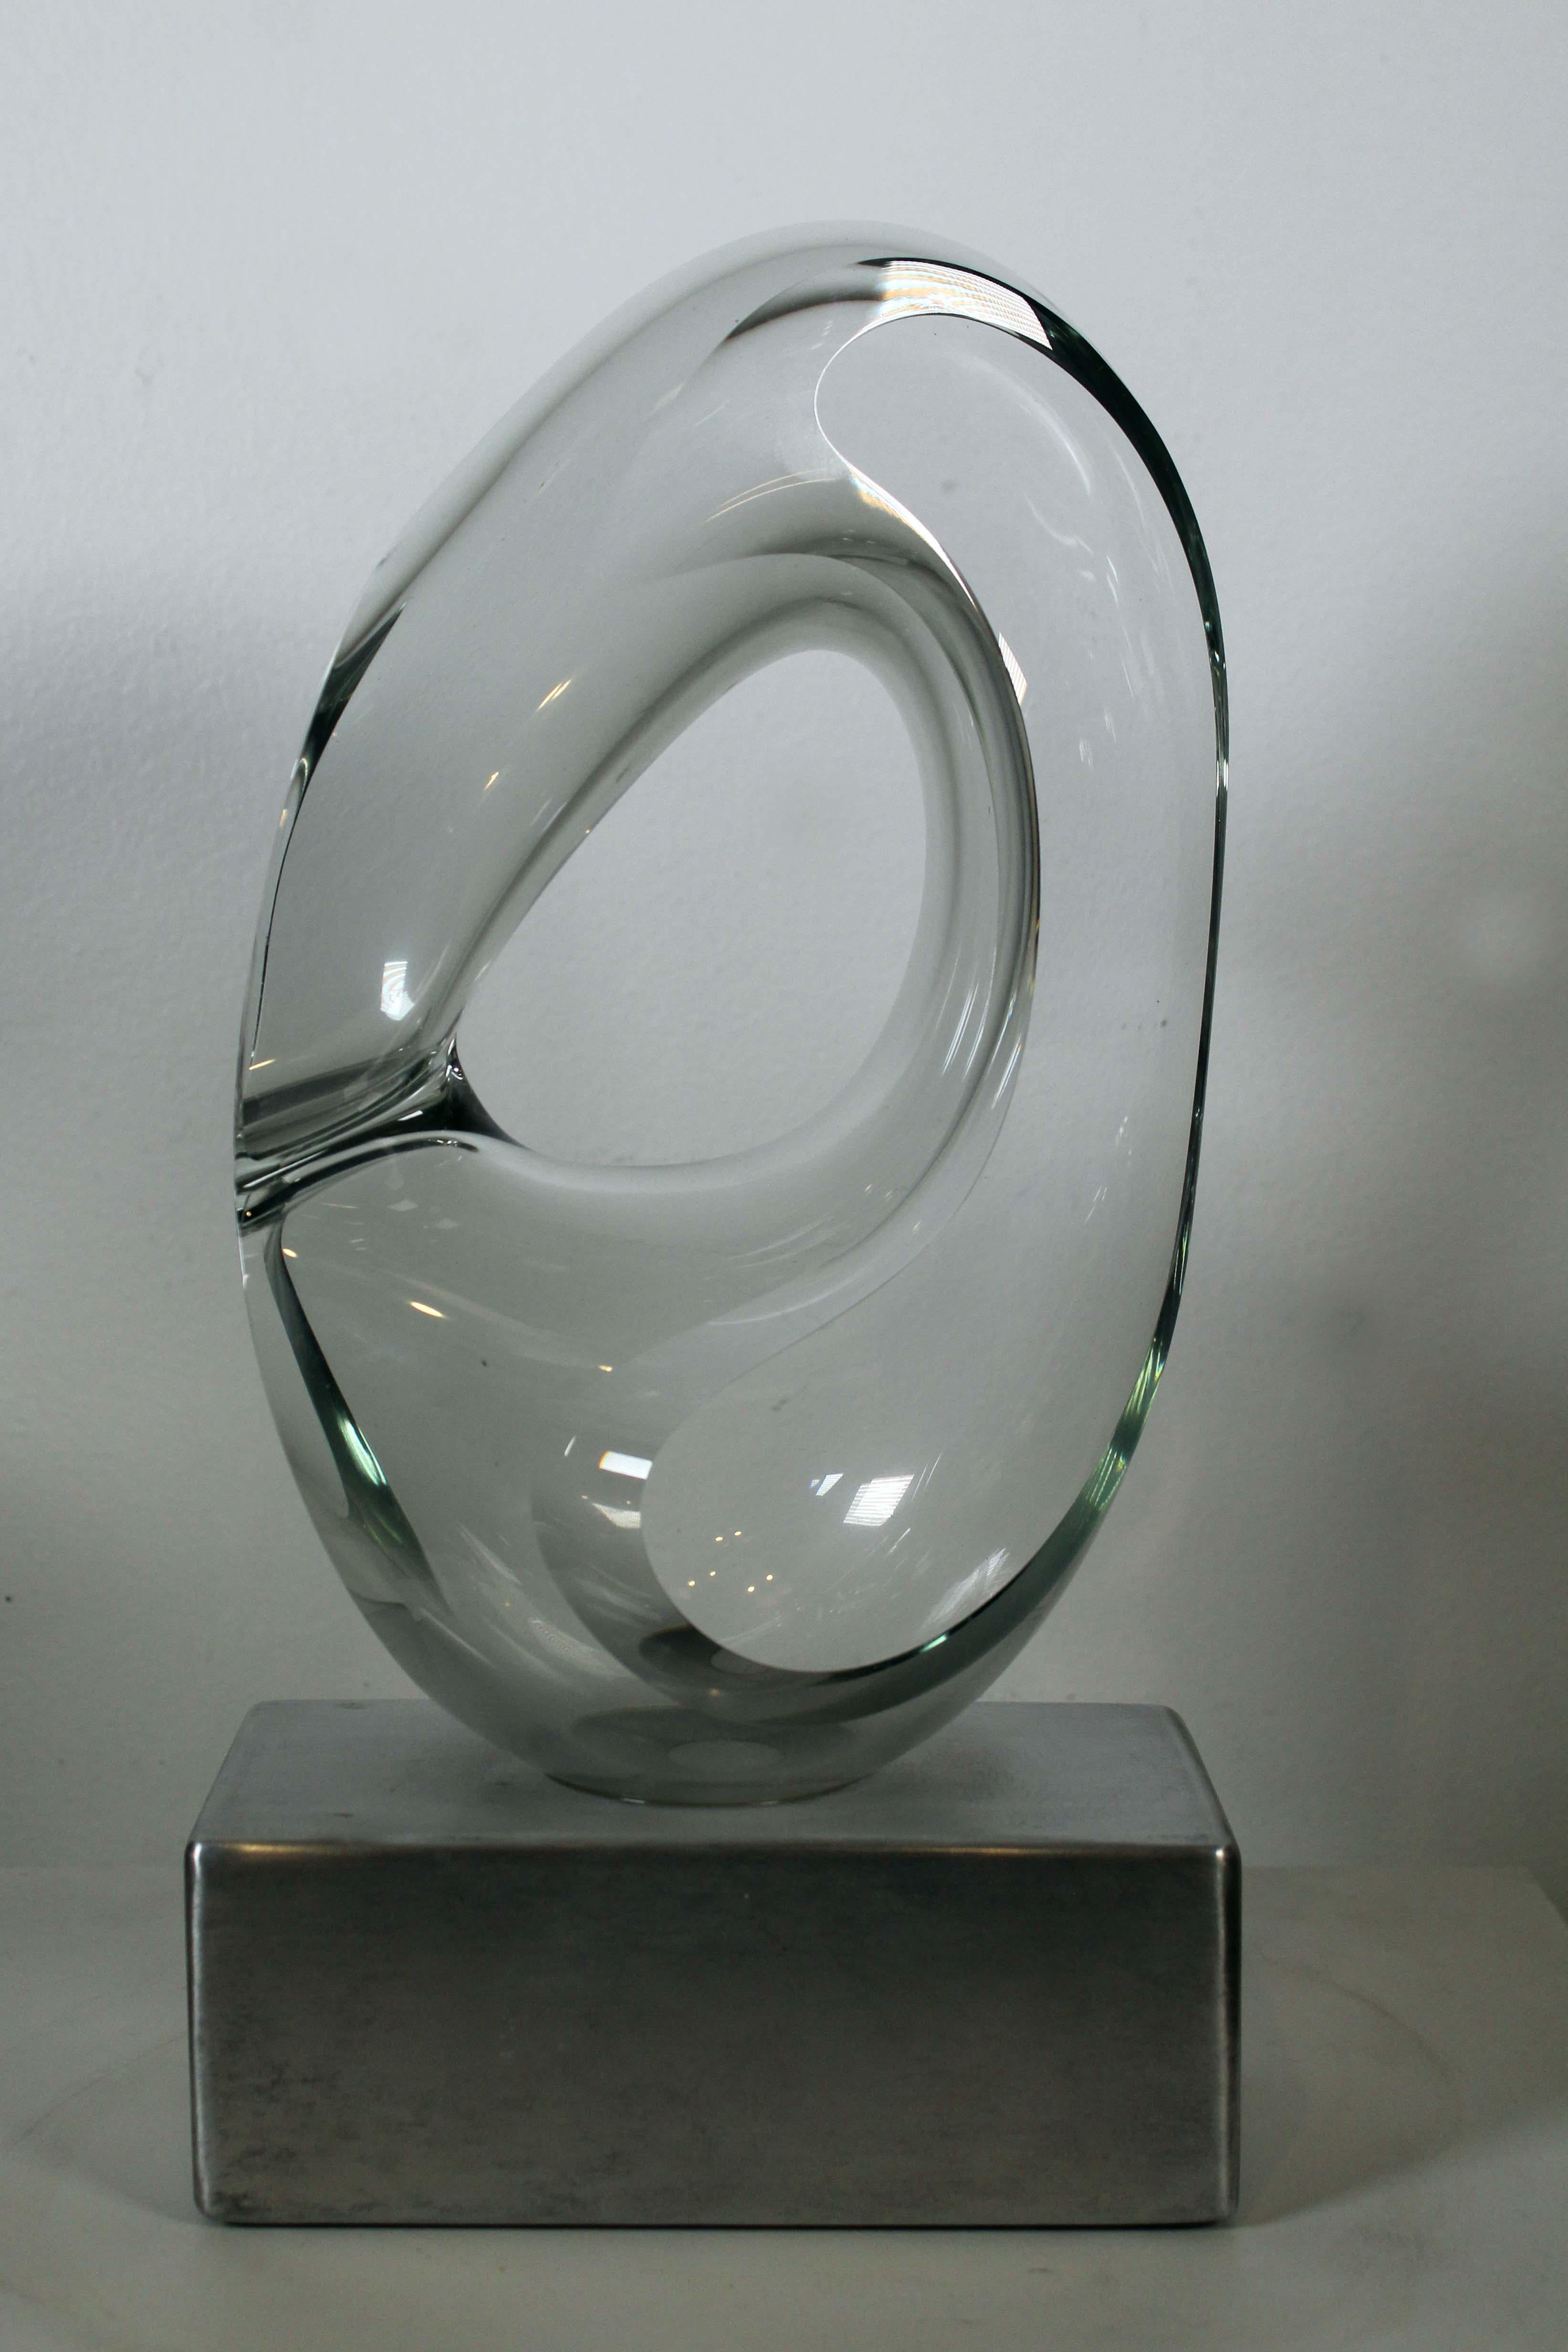 A fantastic contemporary biomorphic abstract hand blown studio glass sculpture by Santa Fe based artist John Bingham. Signed on the aluminum metal base with a 1980 date. The sculpture makes a statement in a contemporary space. Dimensions: 6.5